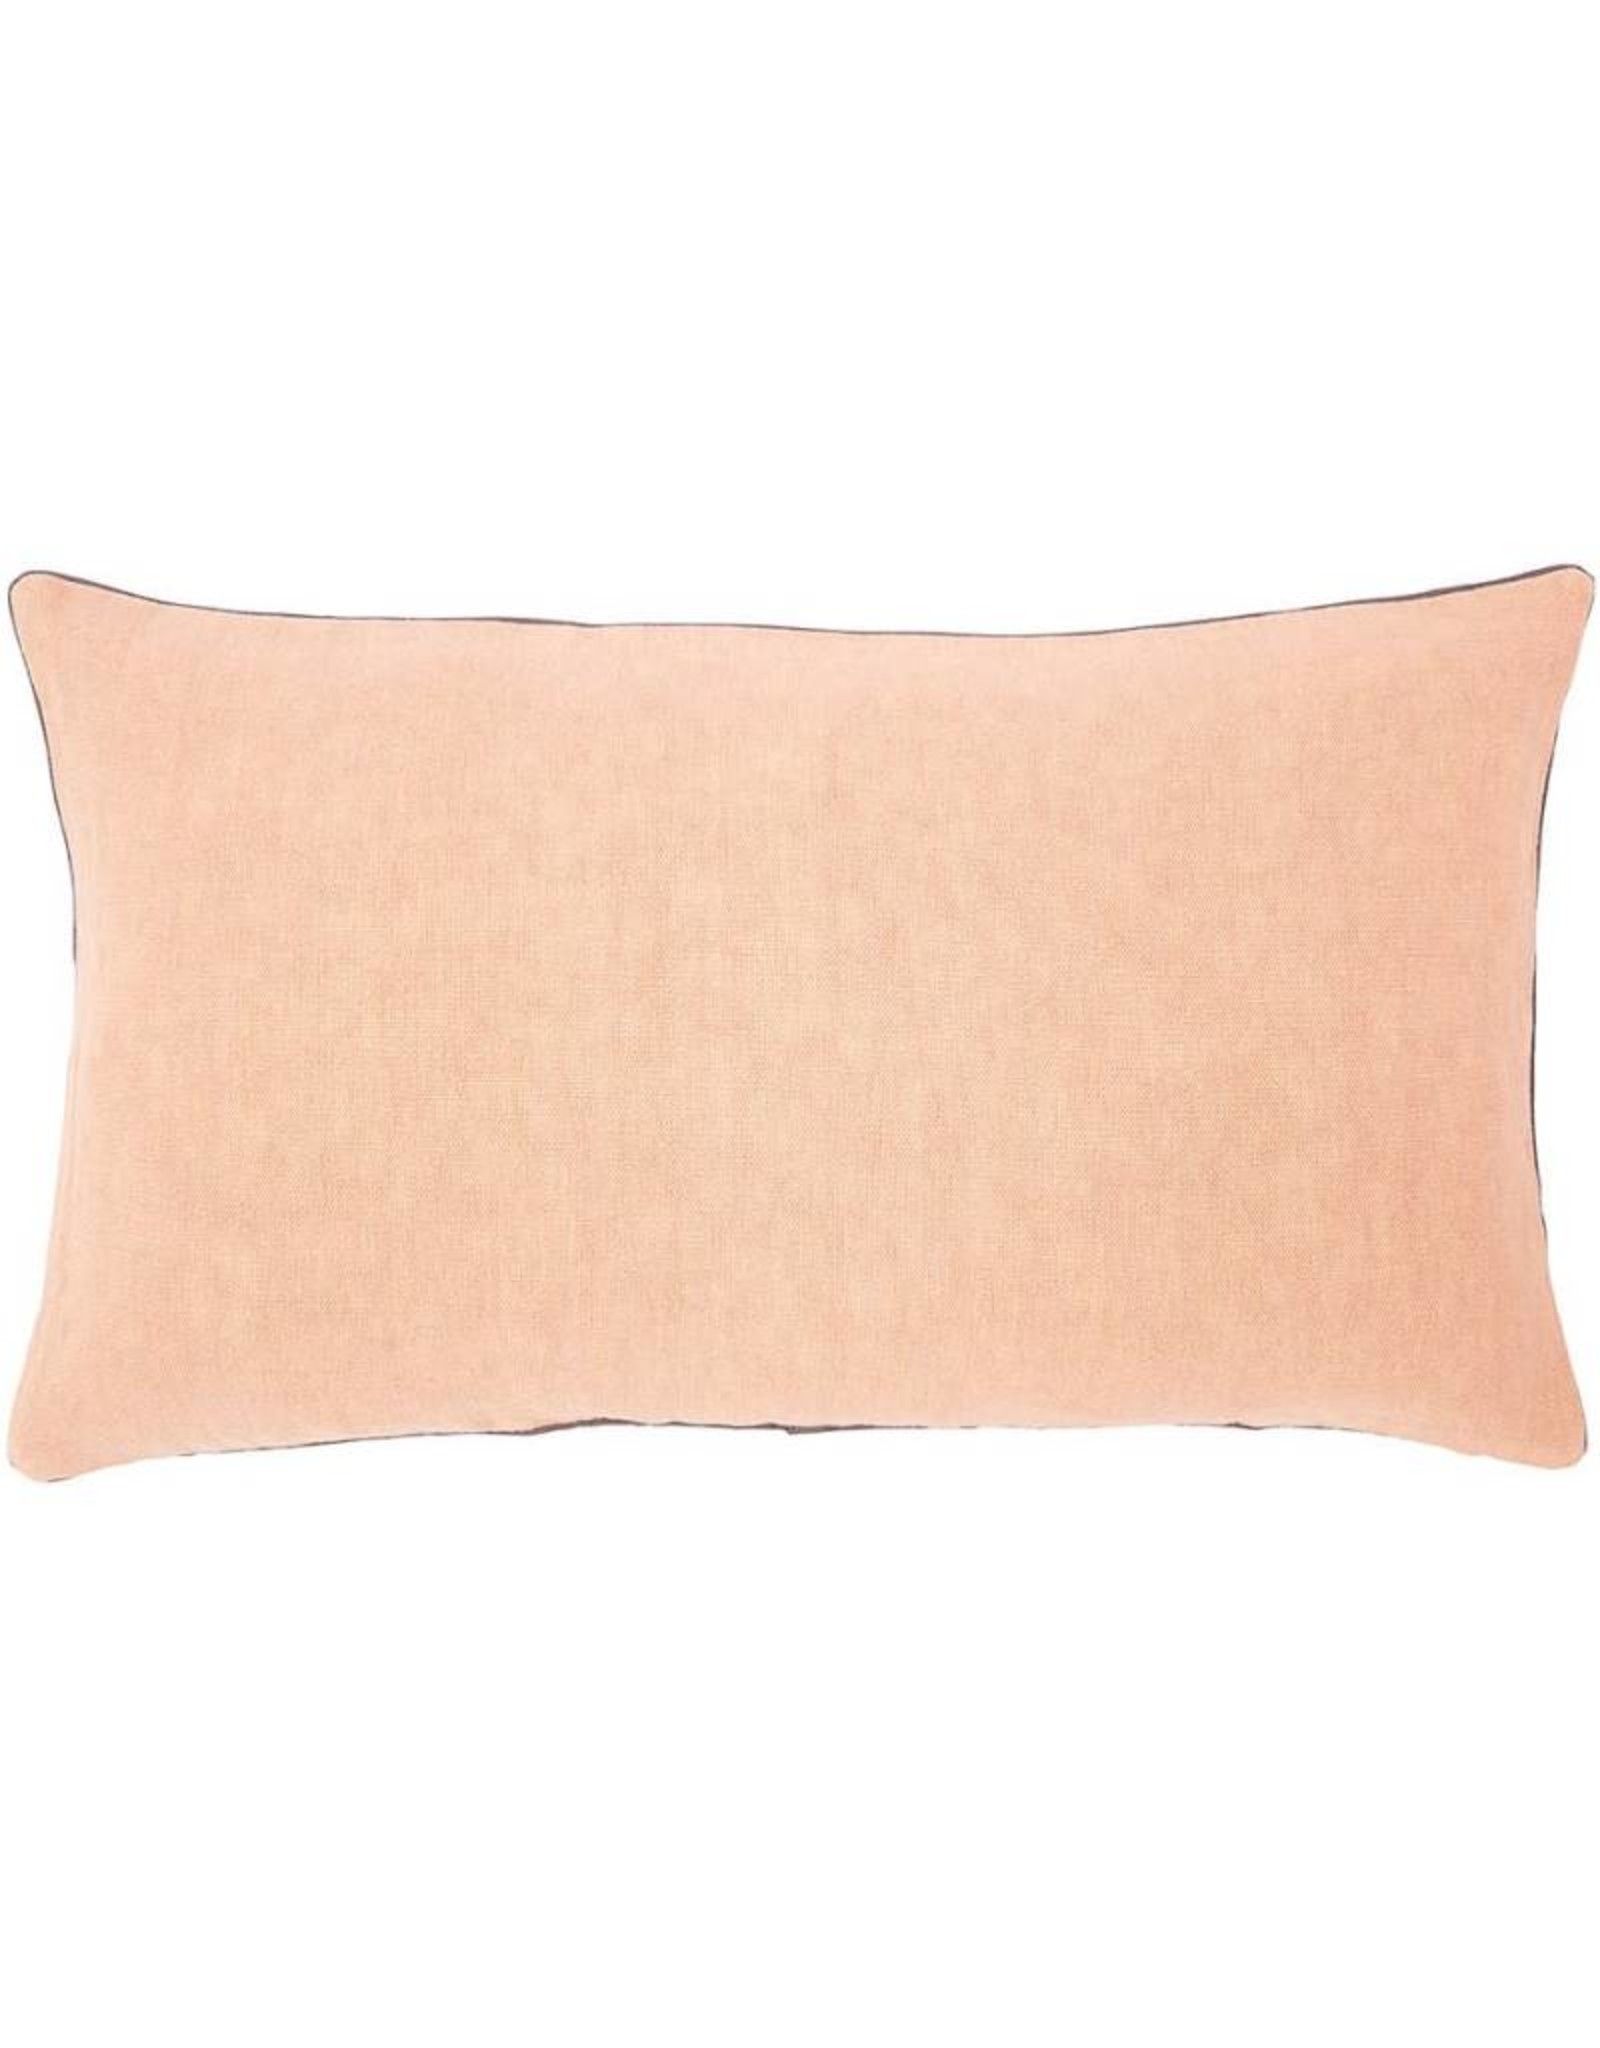 Pigment Decorative Pillow 13x22 by Iosis - Yves Delorme